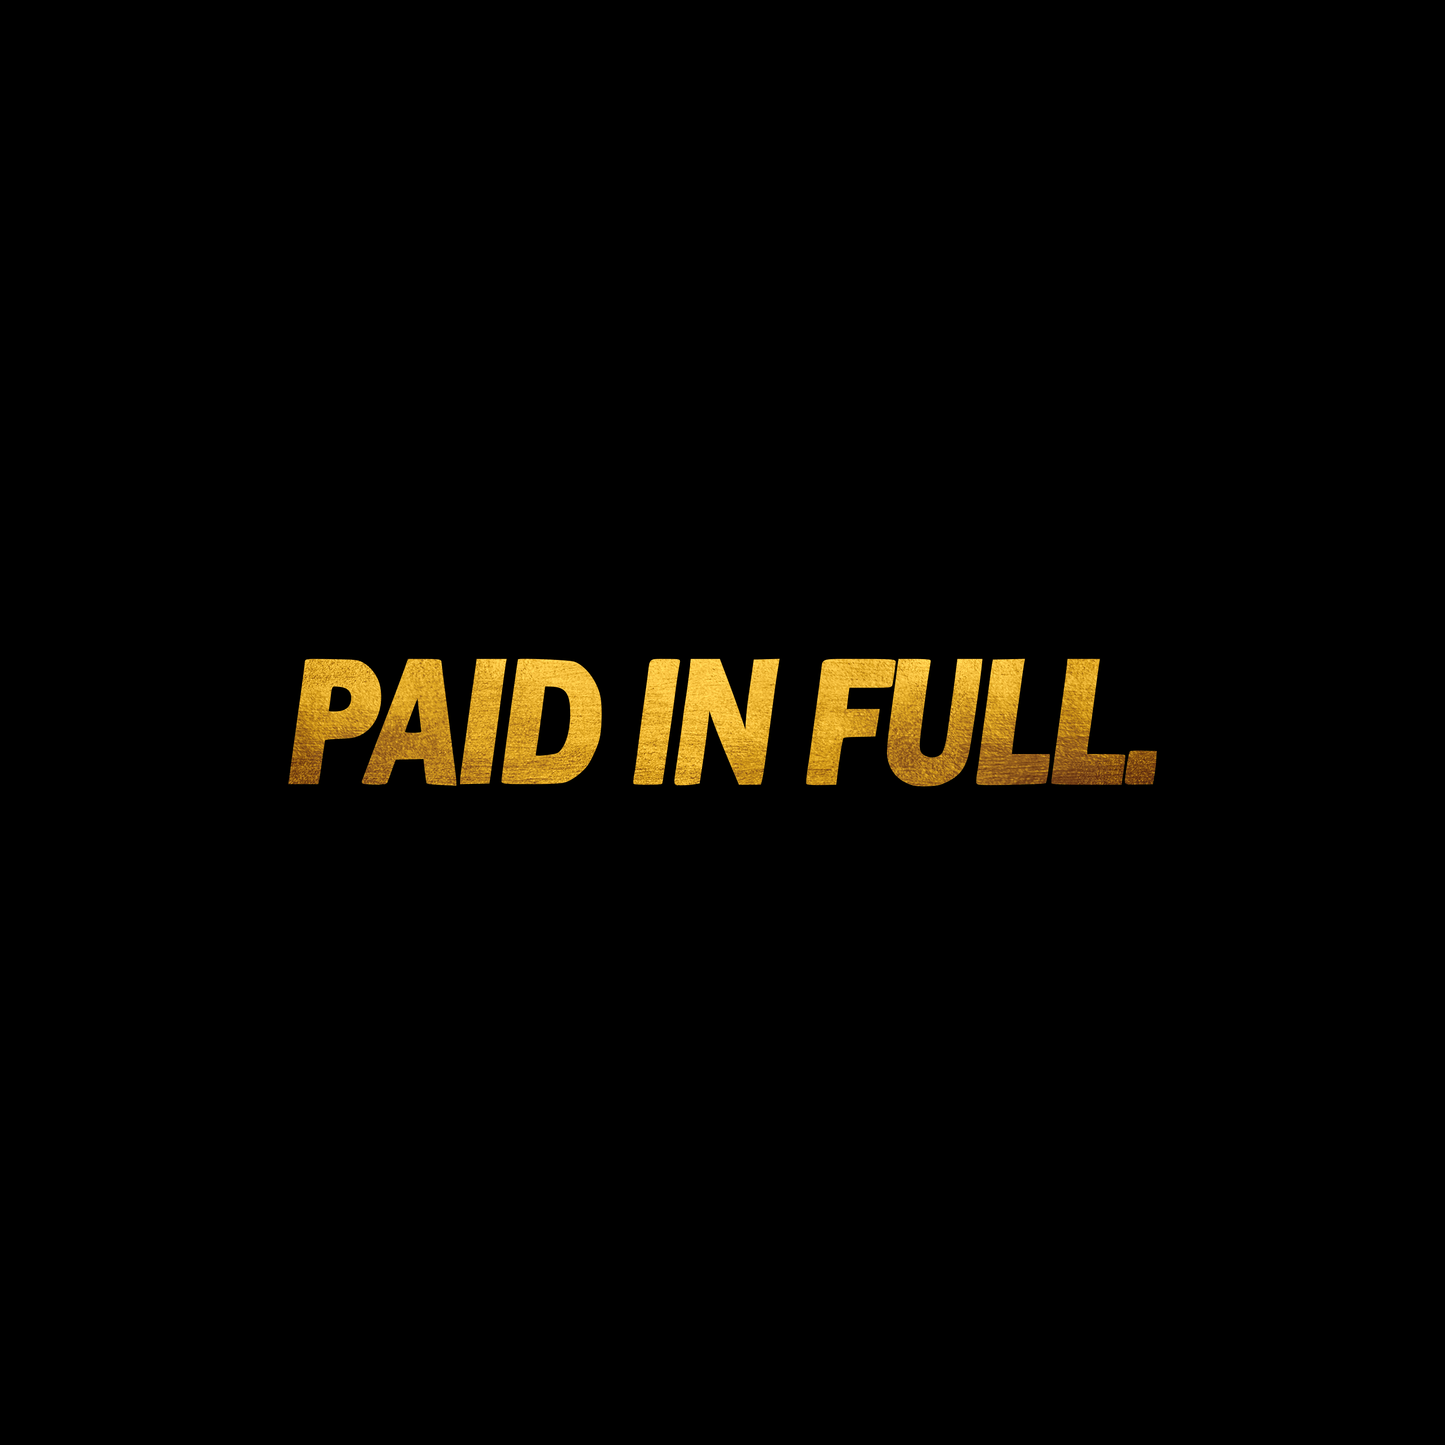 Paid in full sticker decal